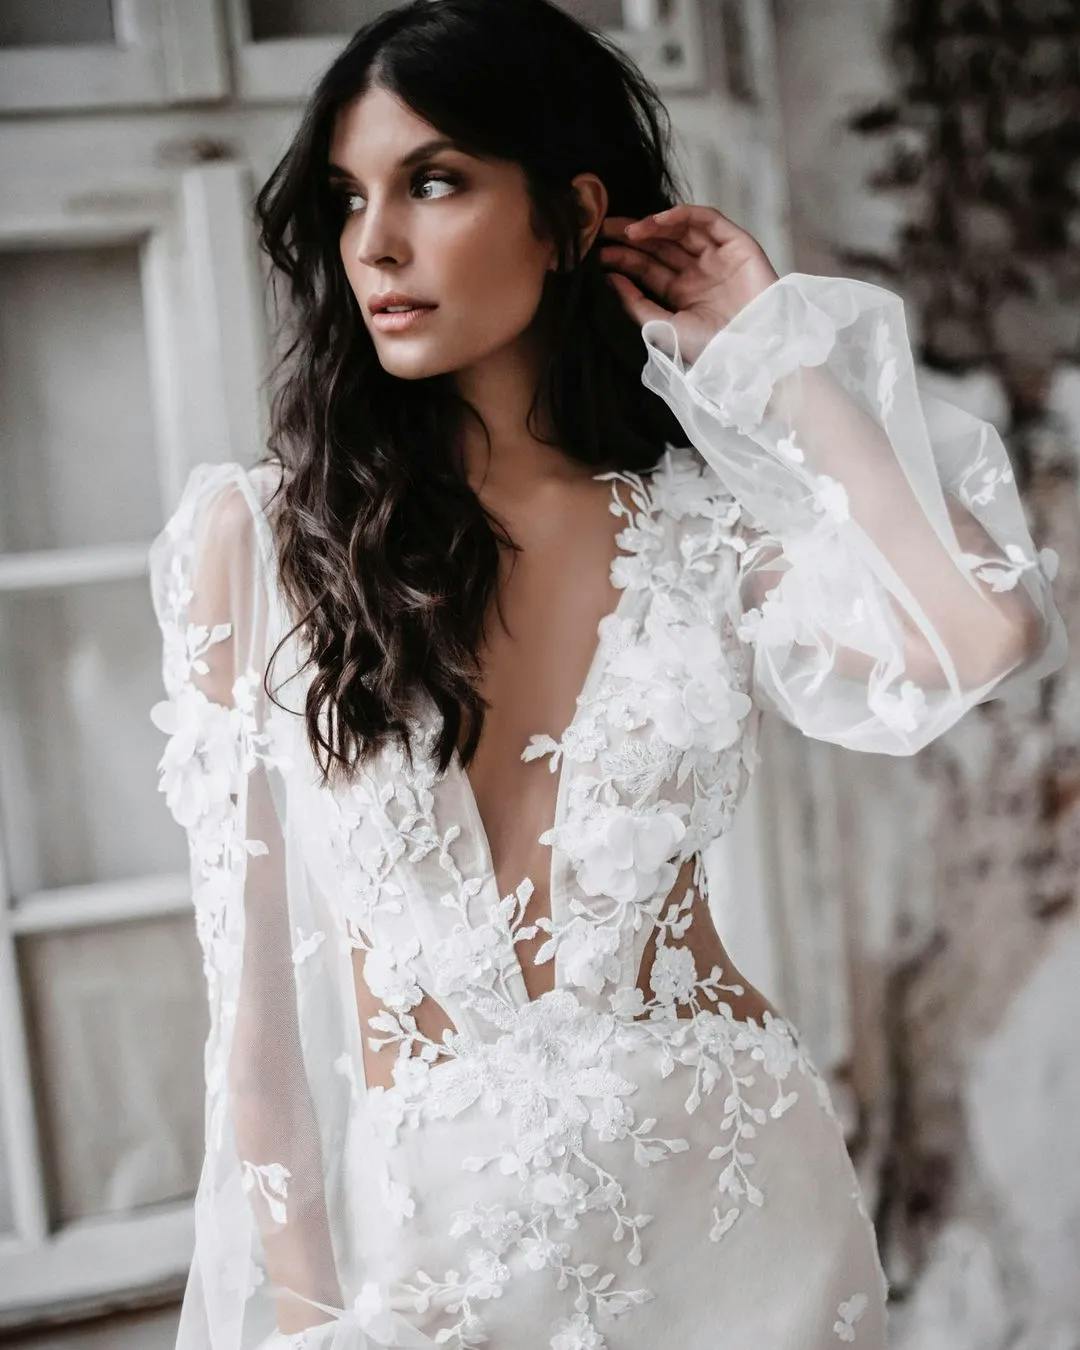 Bride with wedding dress with long sleeves